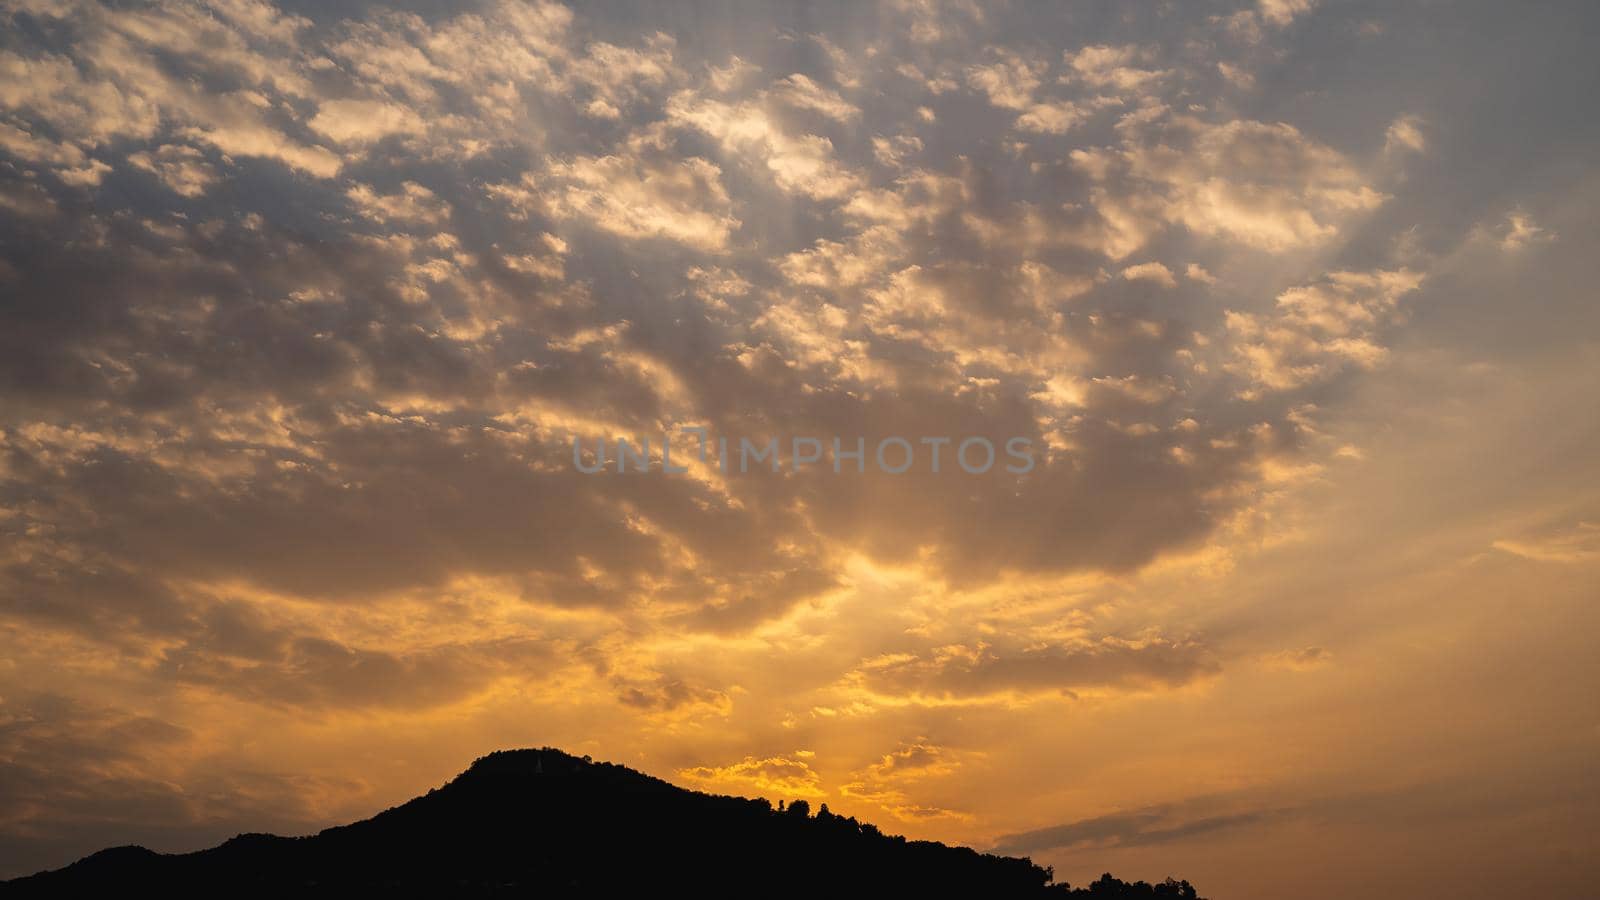 Landscape of silhouette mountain and clouds sunset lighting